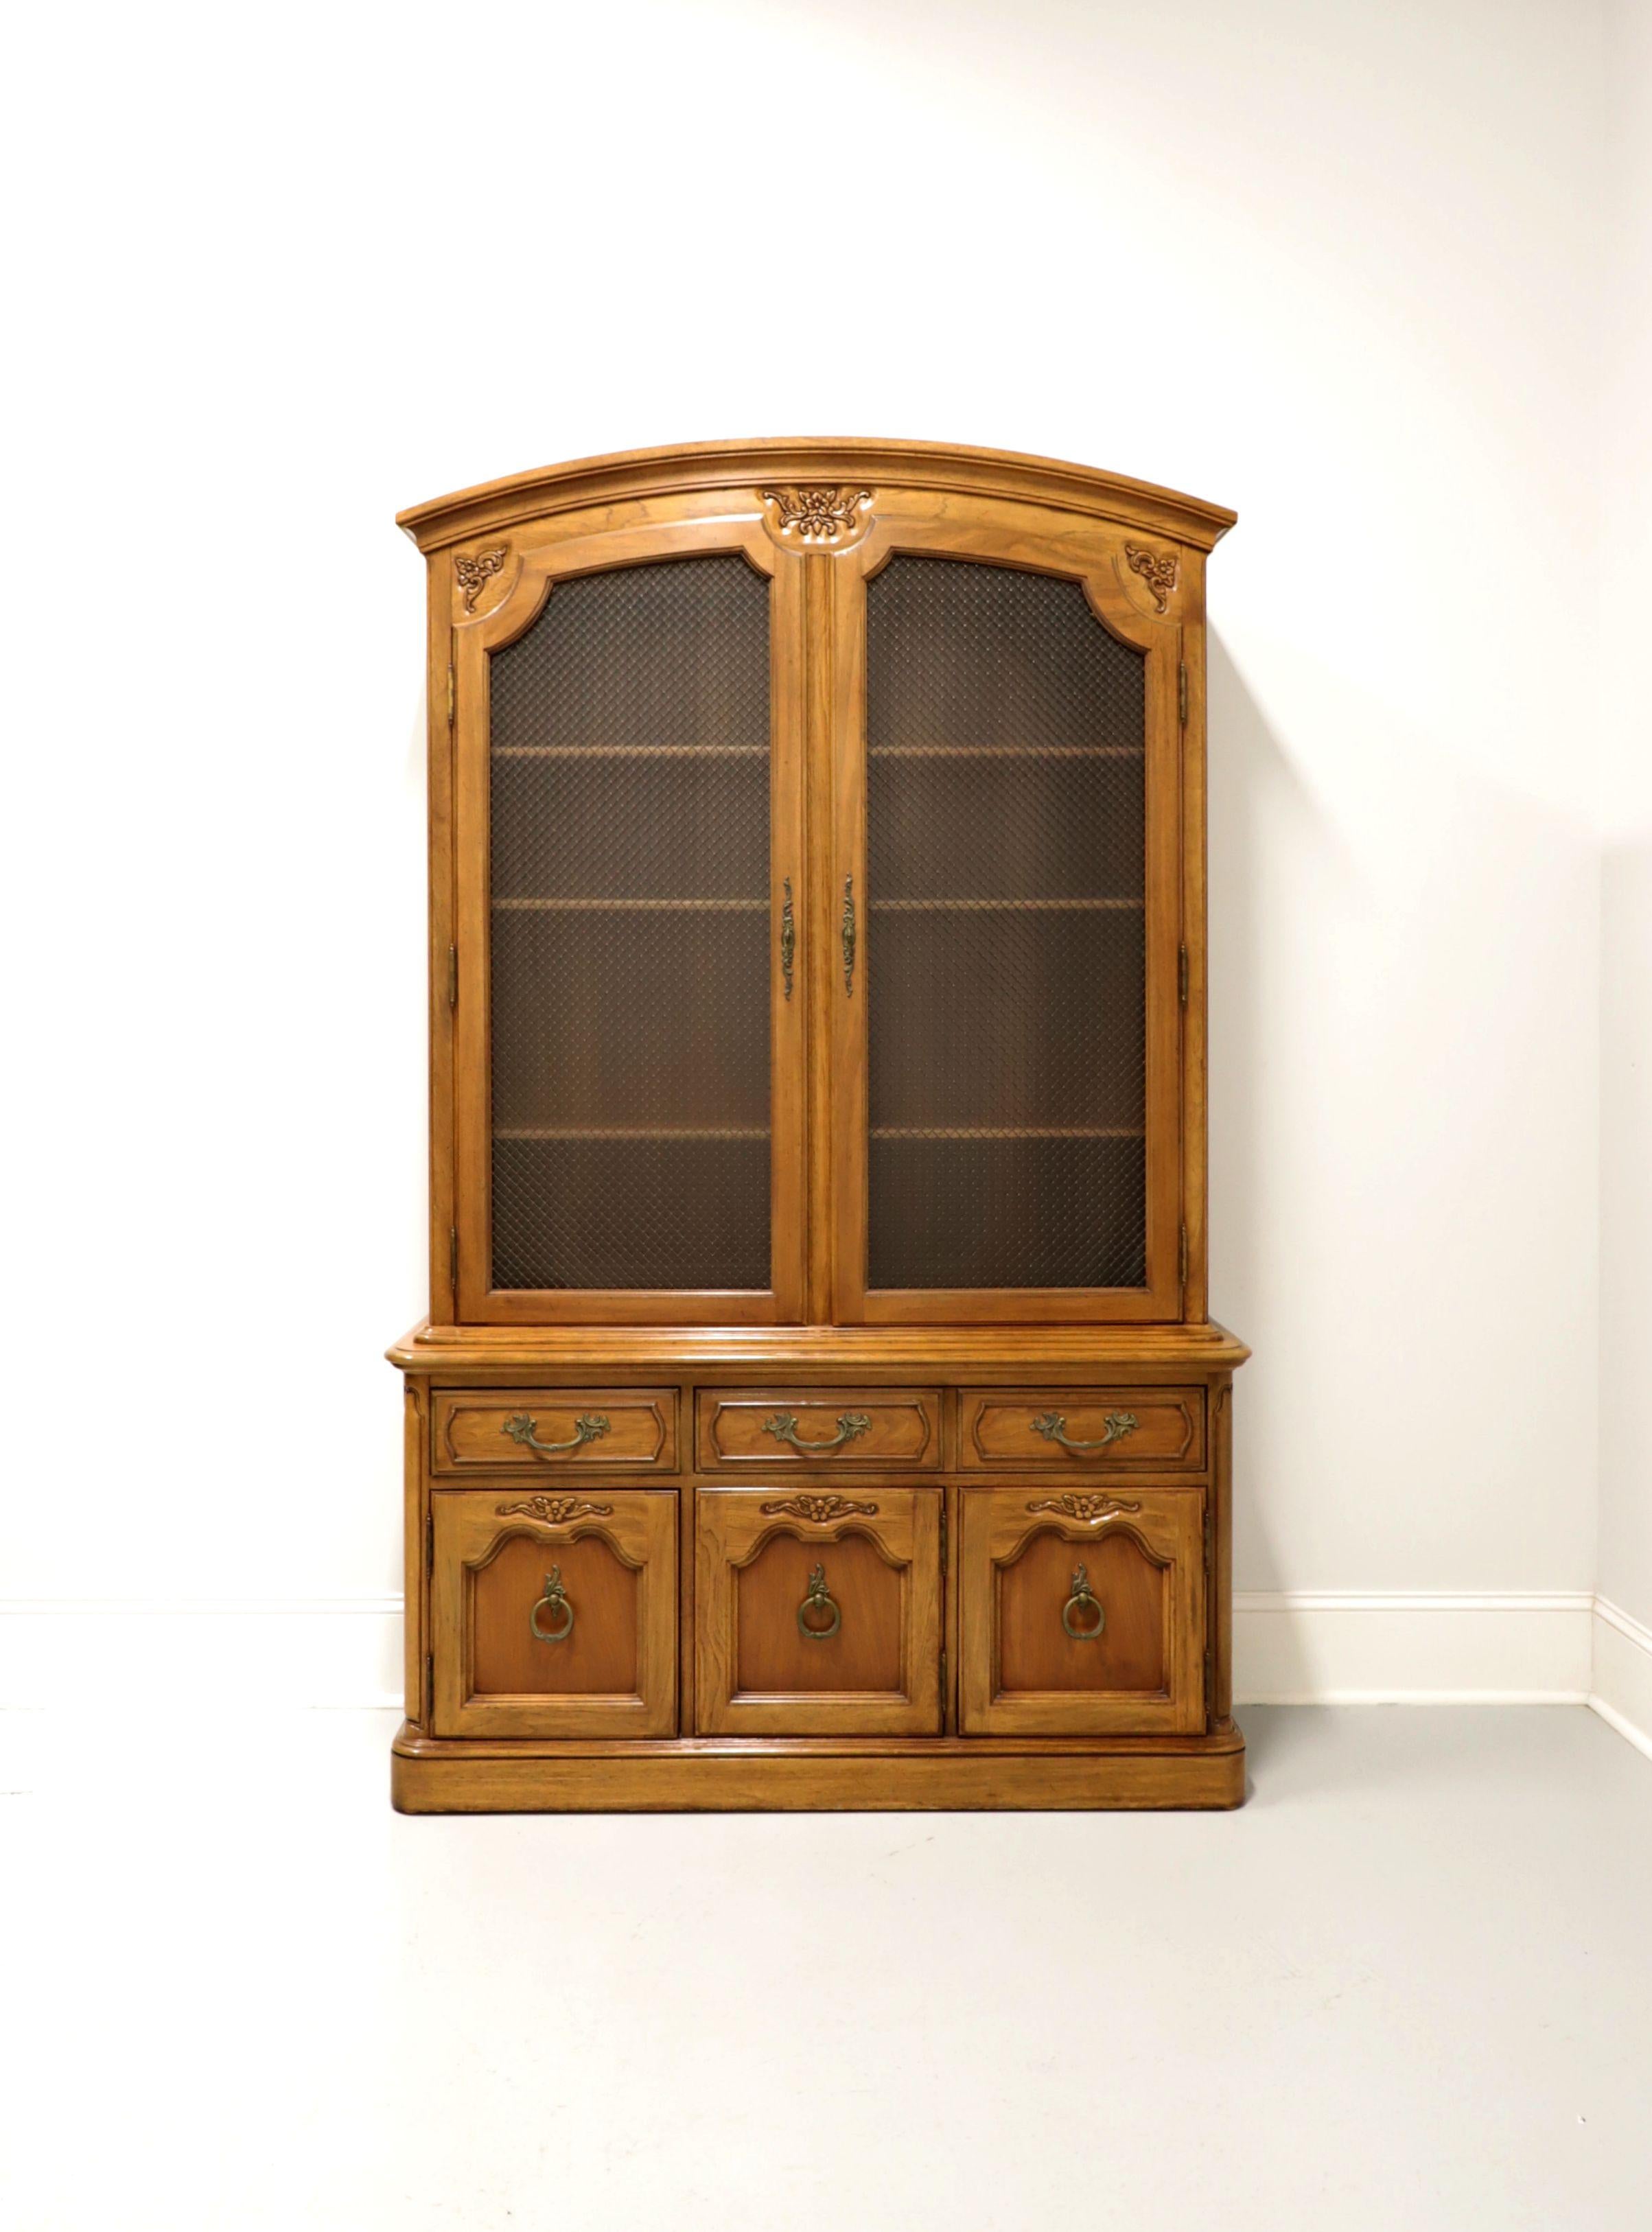 A china display cabinet in the French Country style by Thomasville. Solid oak with brass hardware, arched top, decoratively carved details and rounded corners. Upper cabinet has two glass doors fronted with metal lattice and three adjustable wood